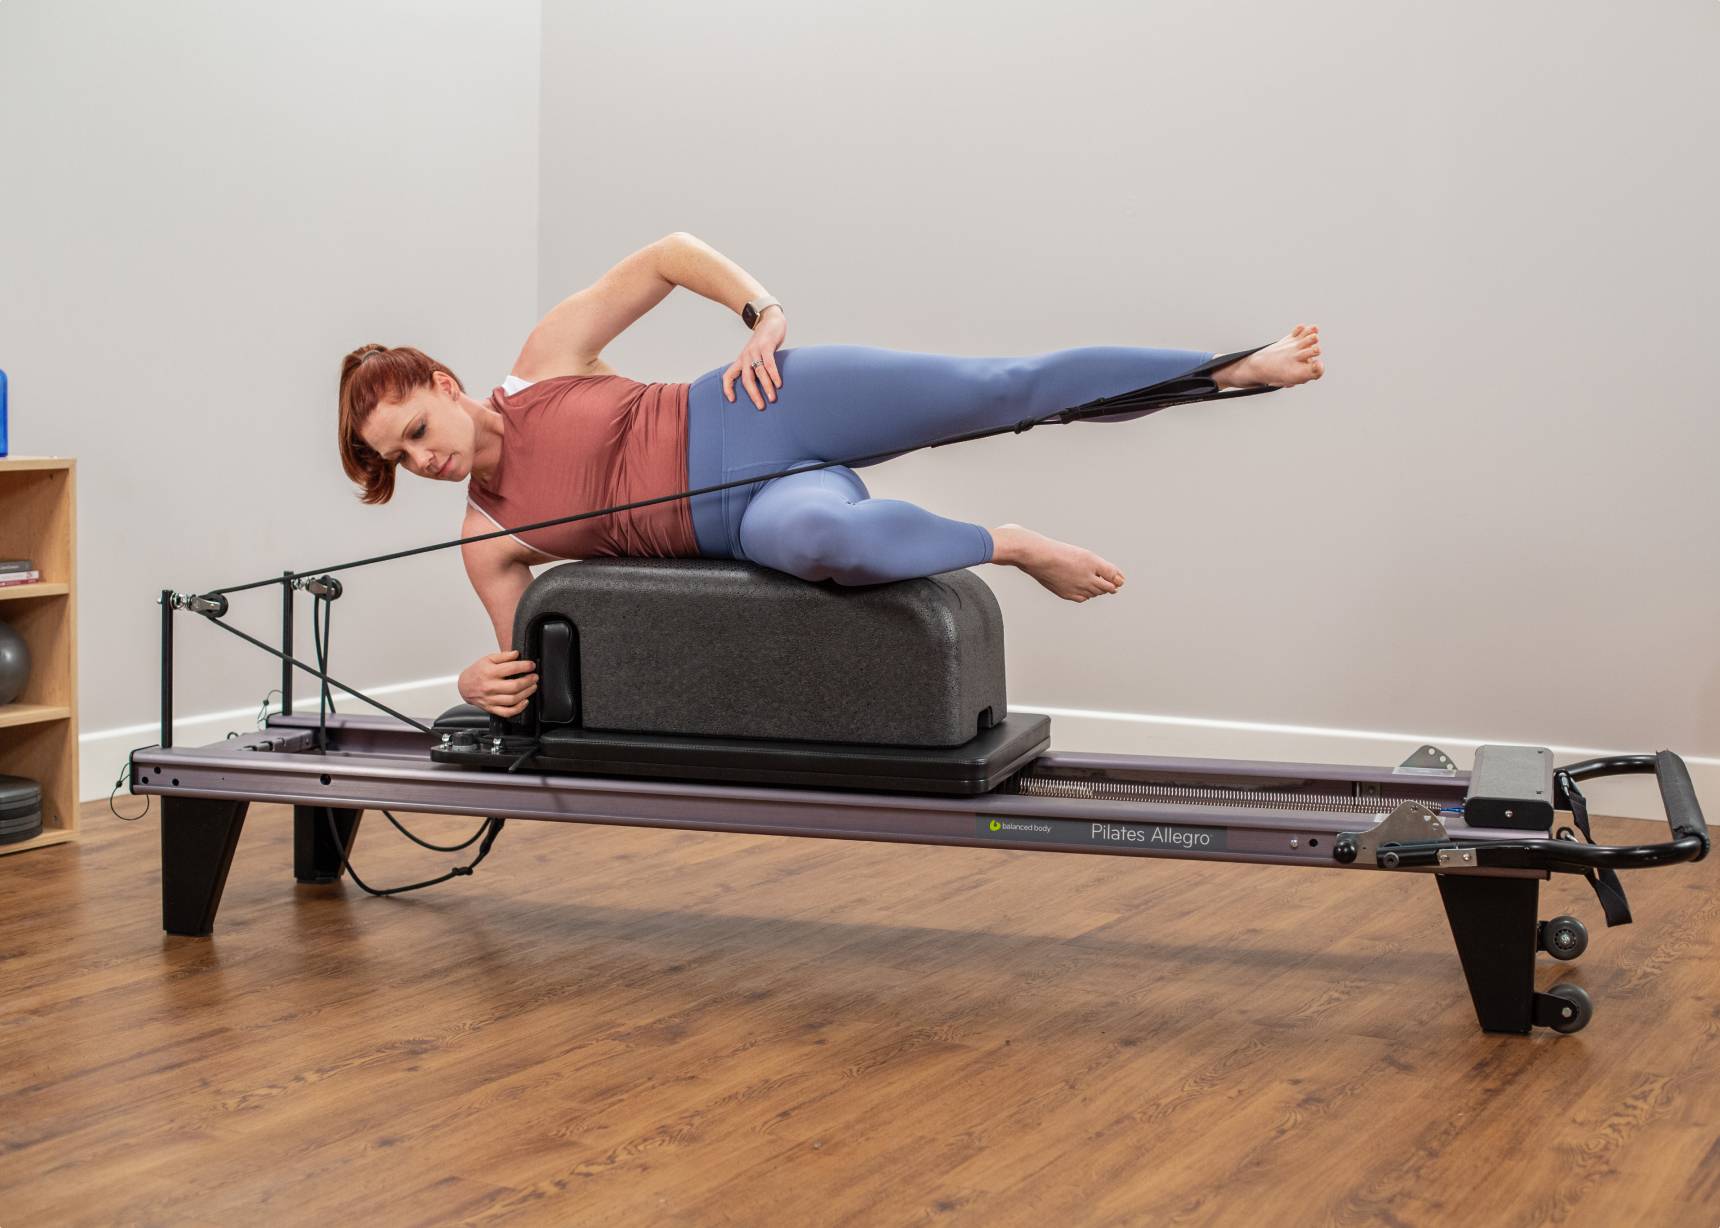 Reformer Box - Extra Long for Pilates Reformers